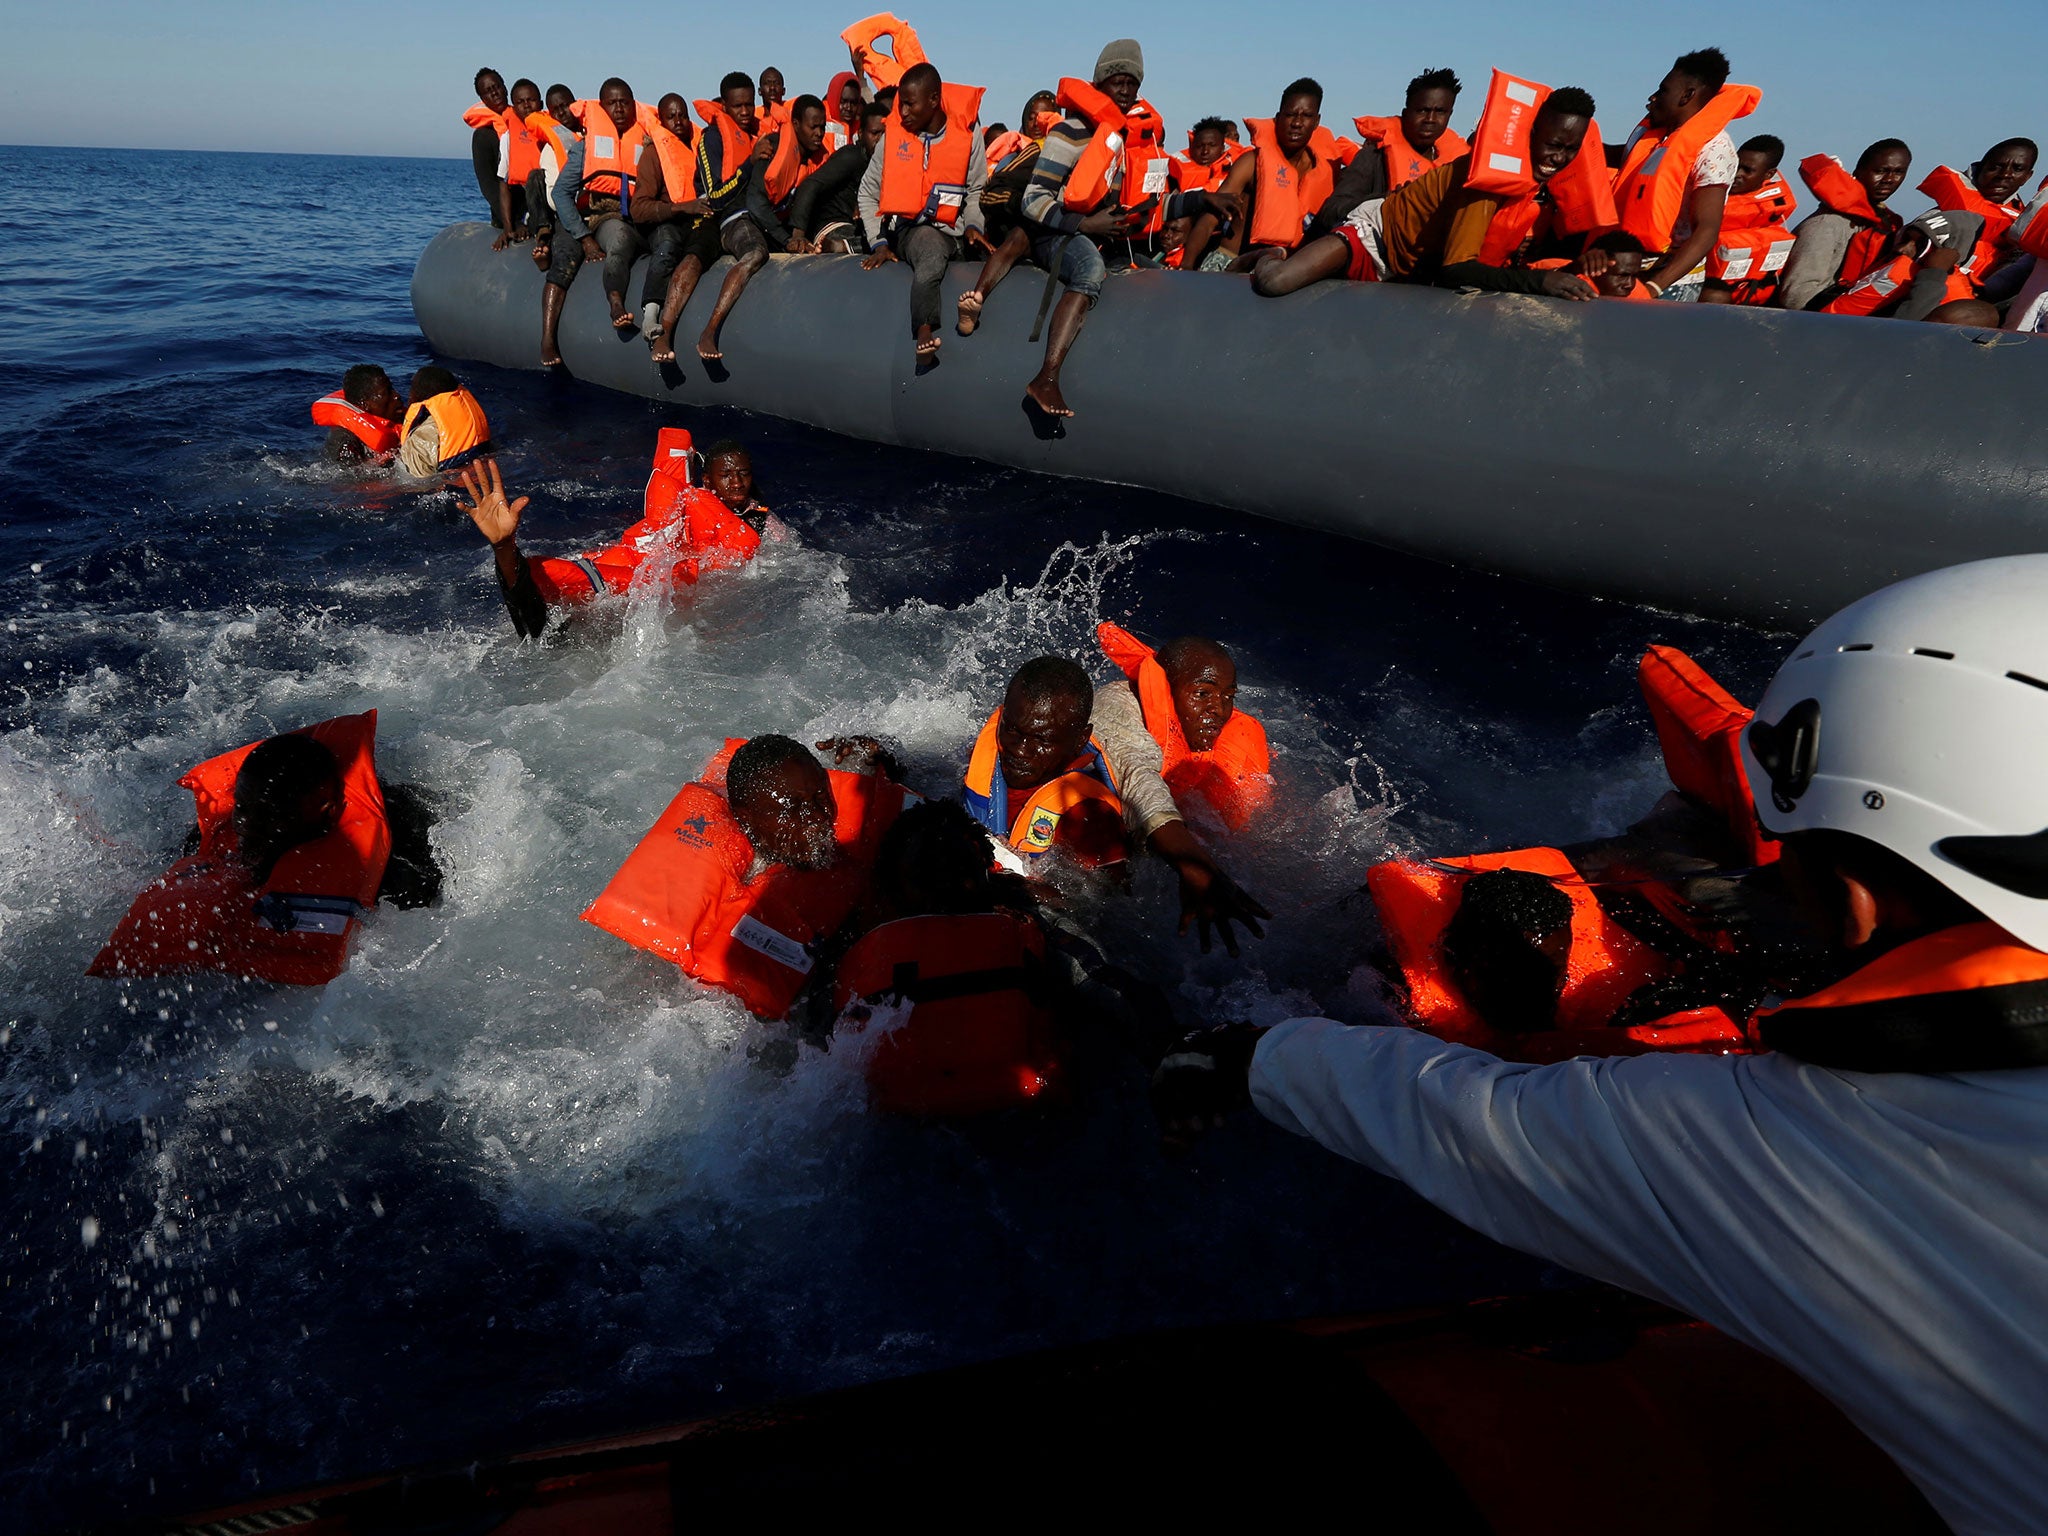 Migrants try to stay afloat after falling off their rubber dinghy during a rescue operation off the coast of Zawiya in Libya